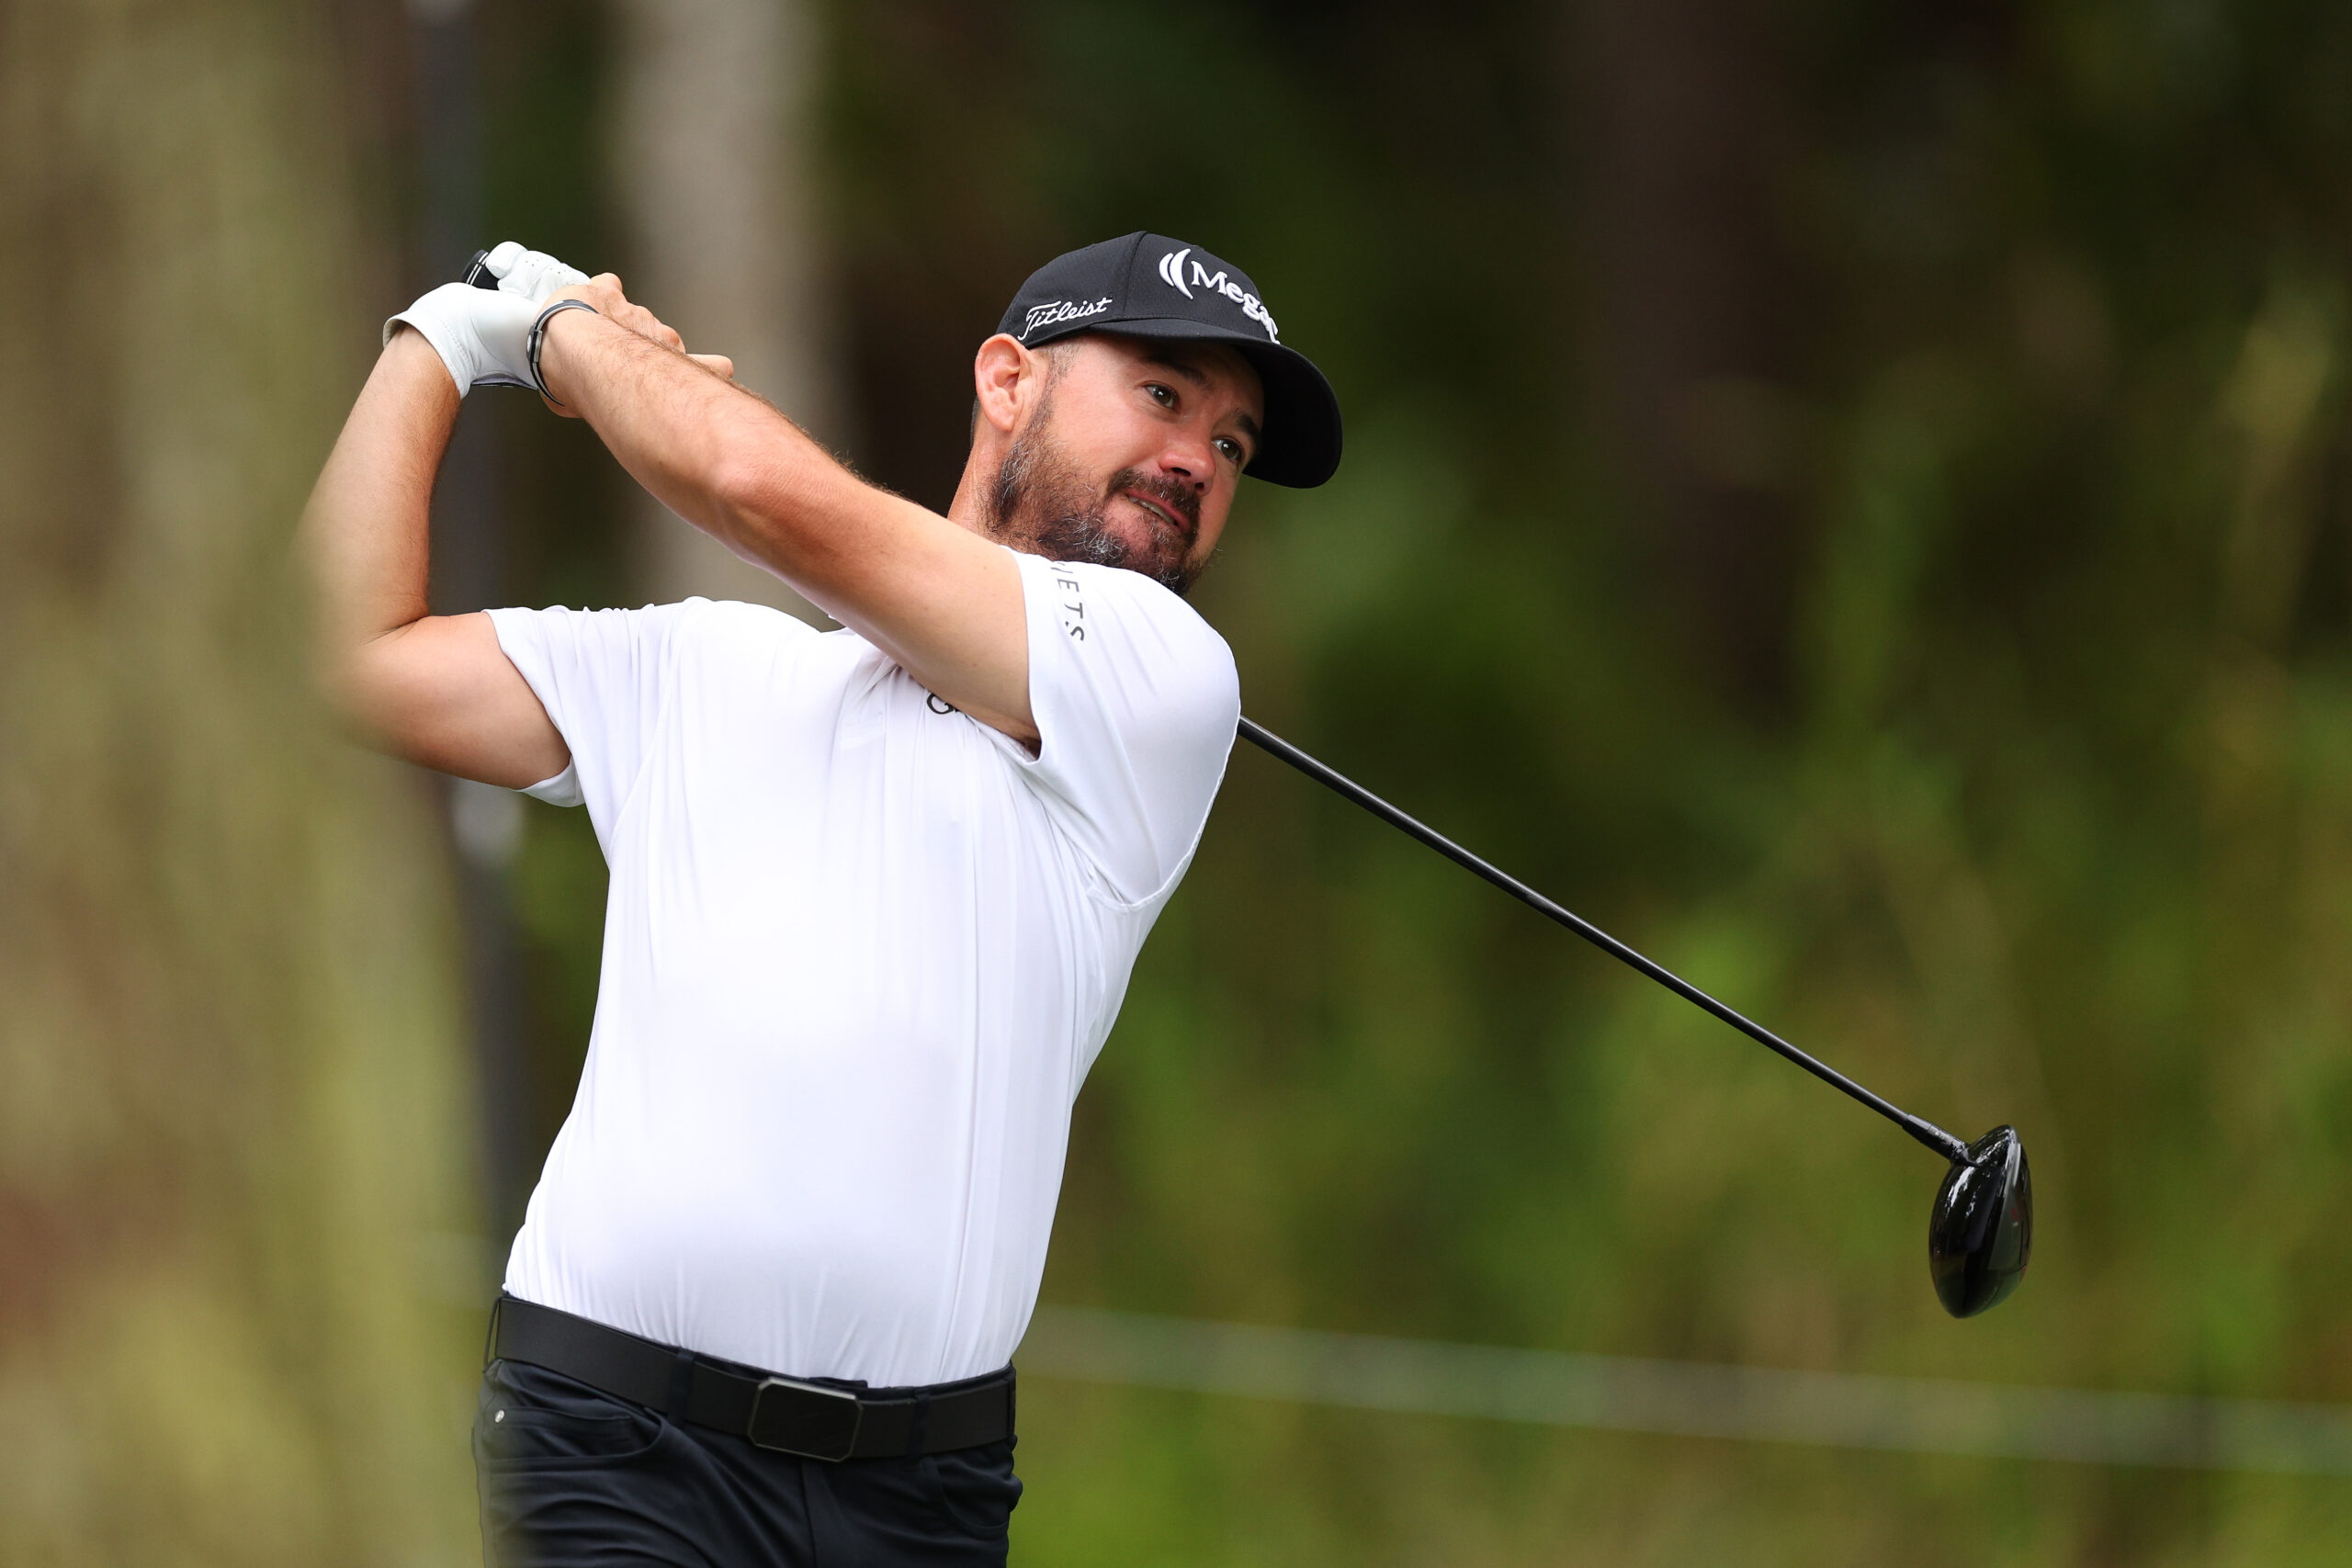 Brian Harman prepared for the RBC Heritage in unique fashion after missing Masters cut, killing a pig and a turkey